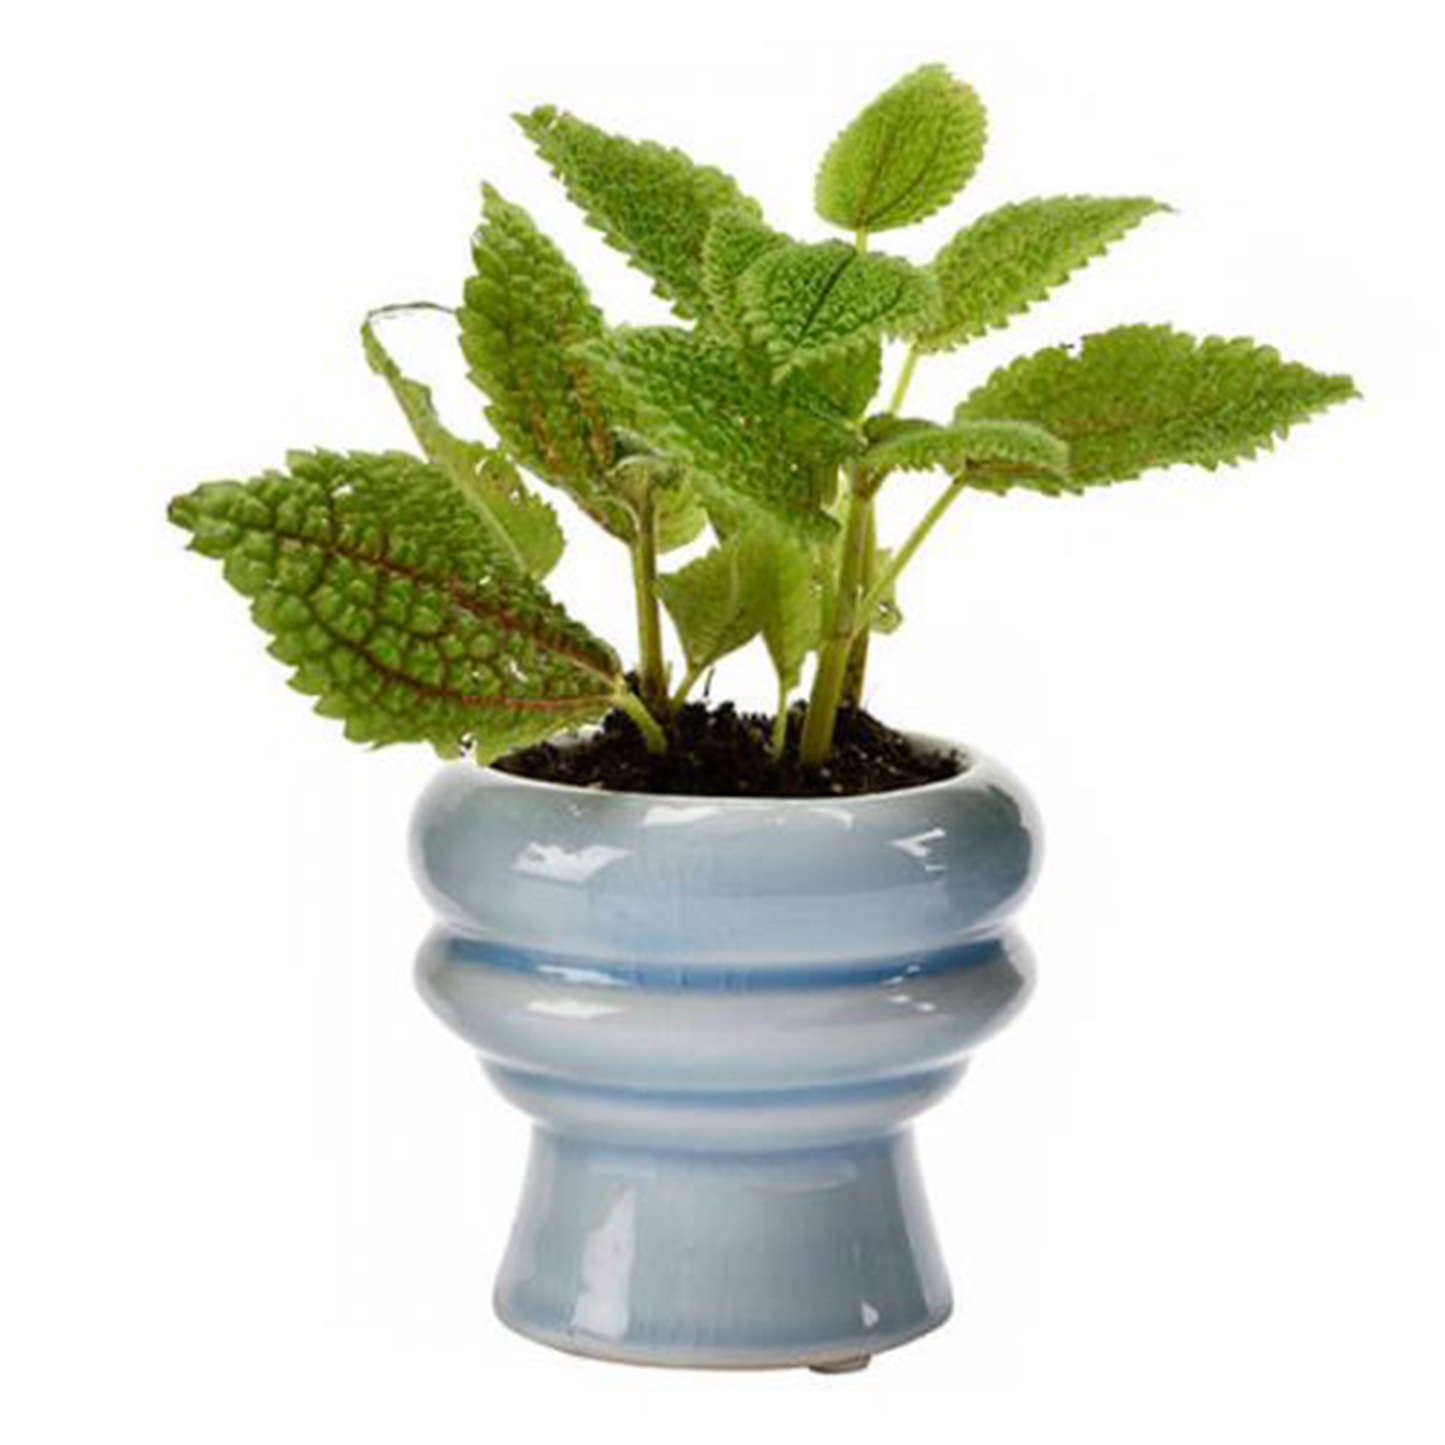 the pot housing some mint